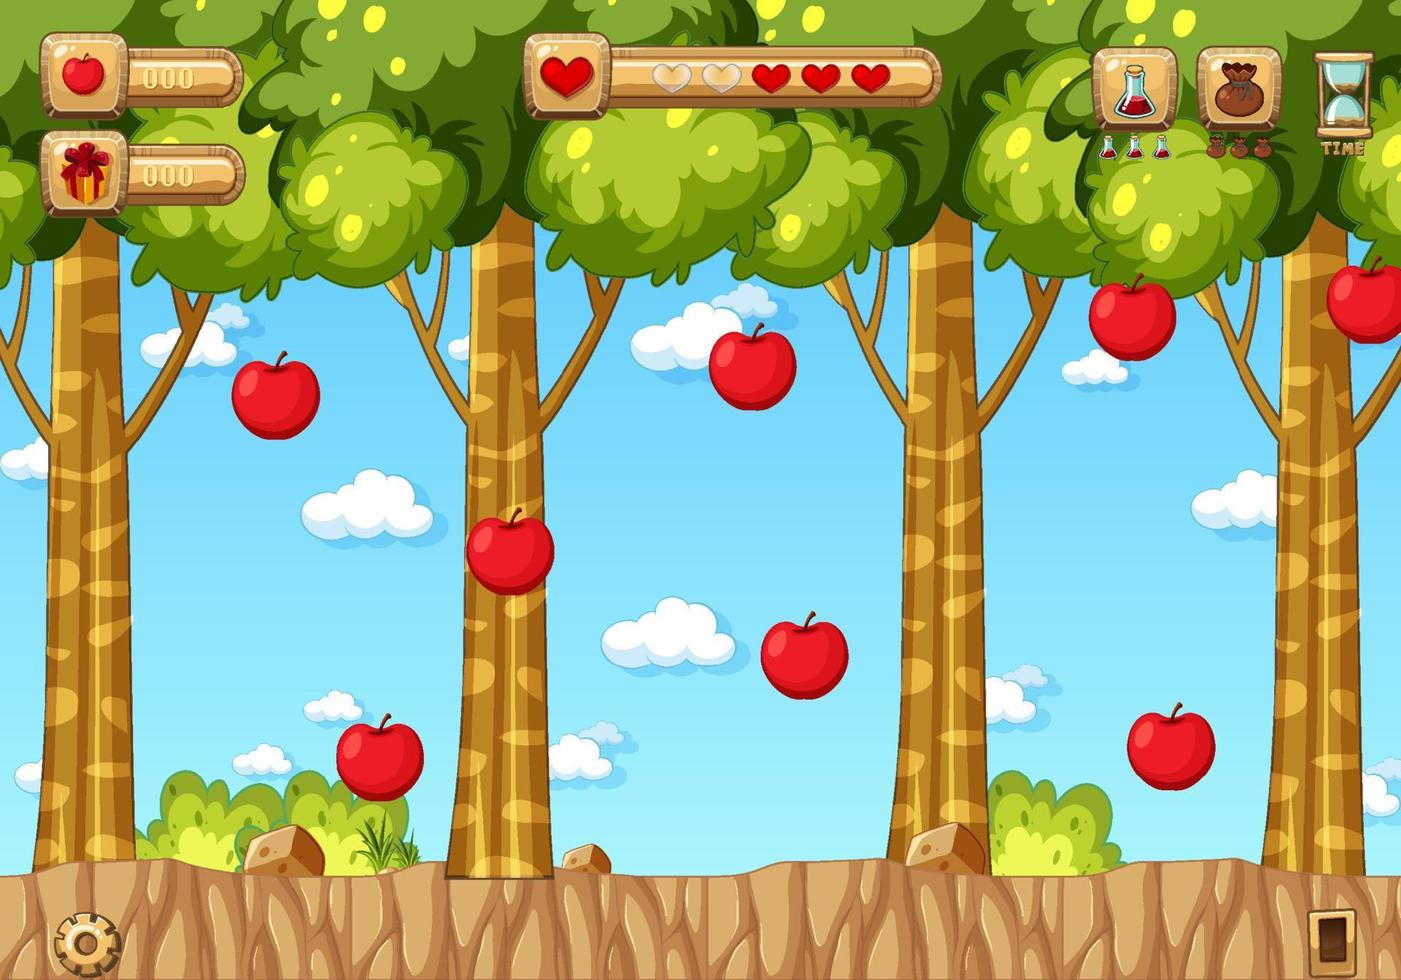 Collecting Apples Platform Game Template vector